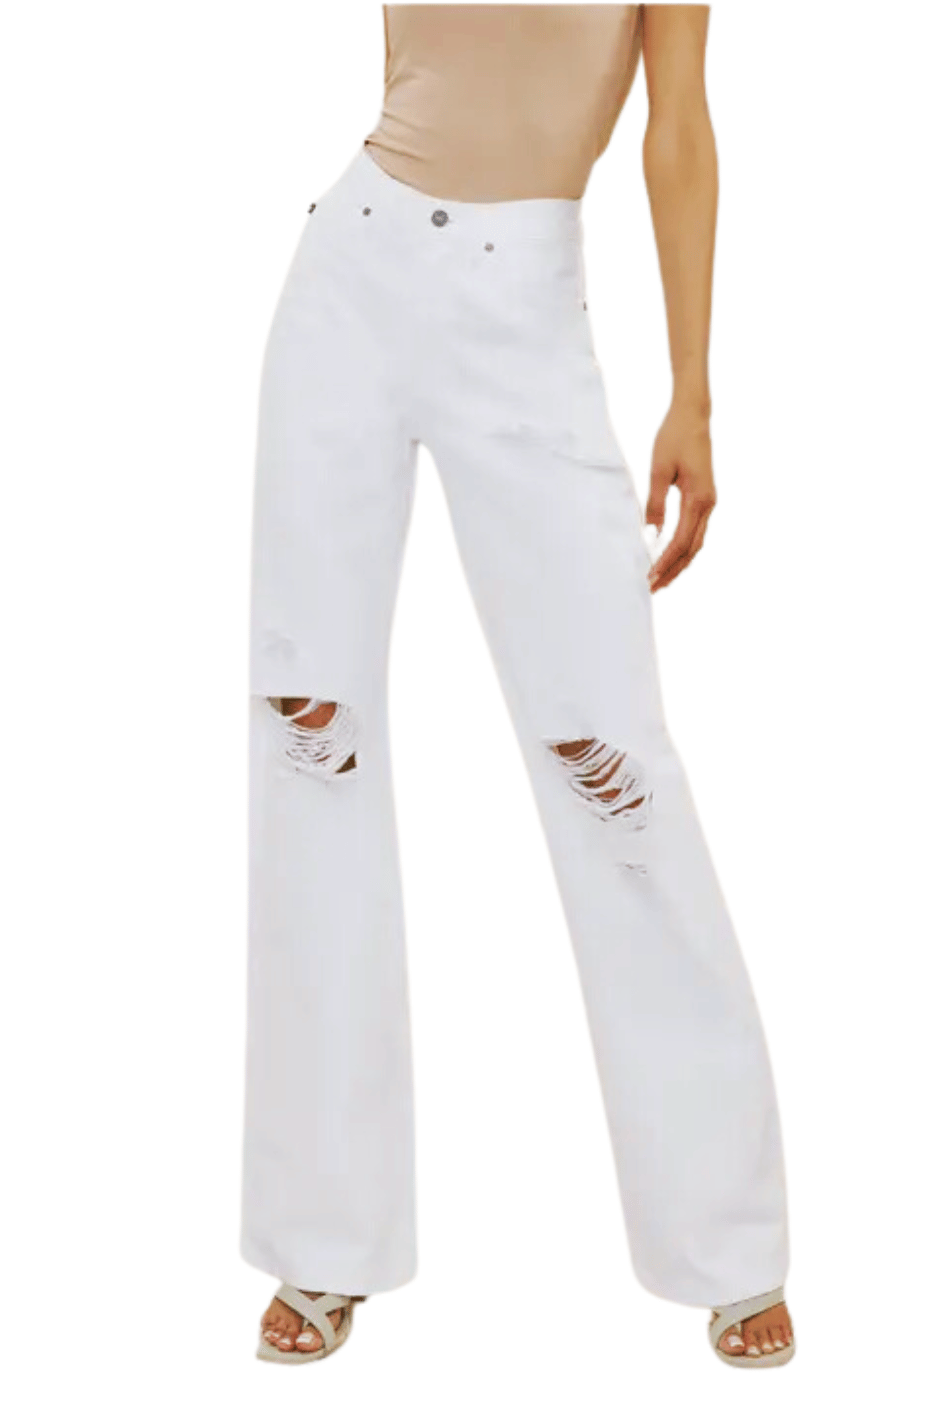 Celestial Ultra High Rise 90's Flare Jeans - Expressive Collective CO.